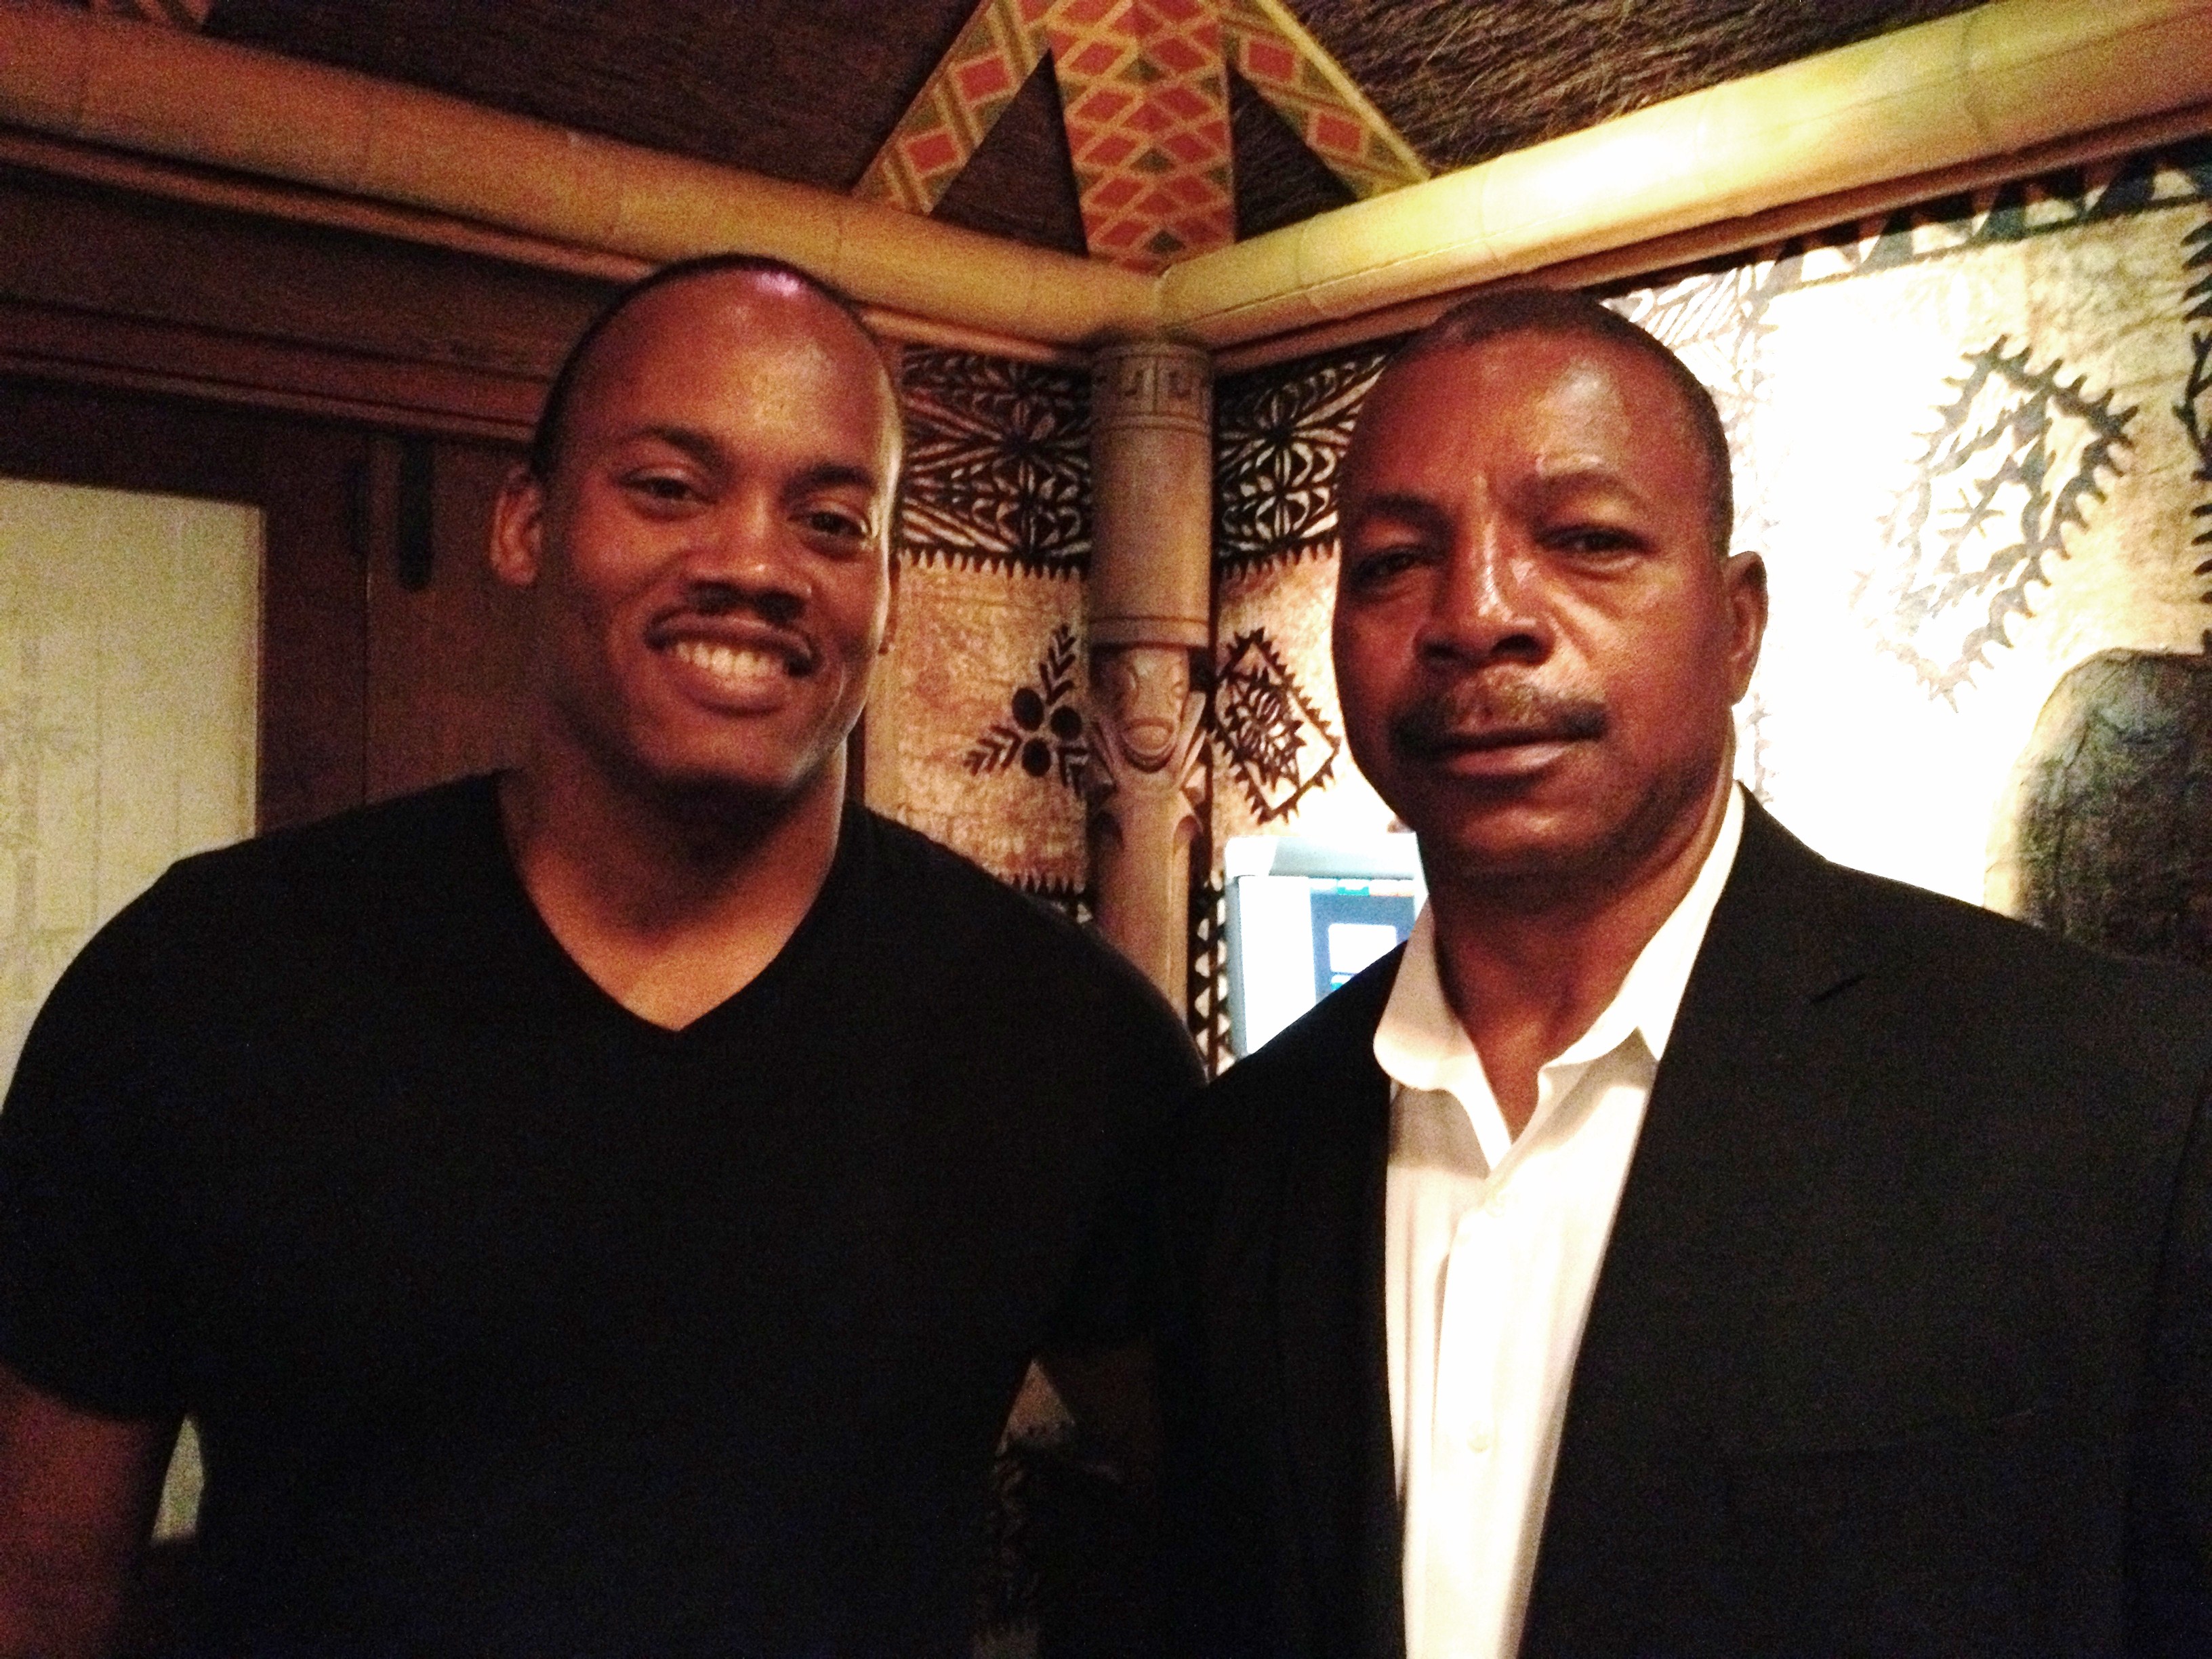 Producer/Director Greg Carter and legendary Actor/Director Carl Weathers at Filmmaker luncheon provided by the Trinidad & Tobago Film Commission at Trader Vic's at L.A. Live